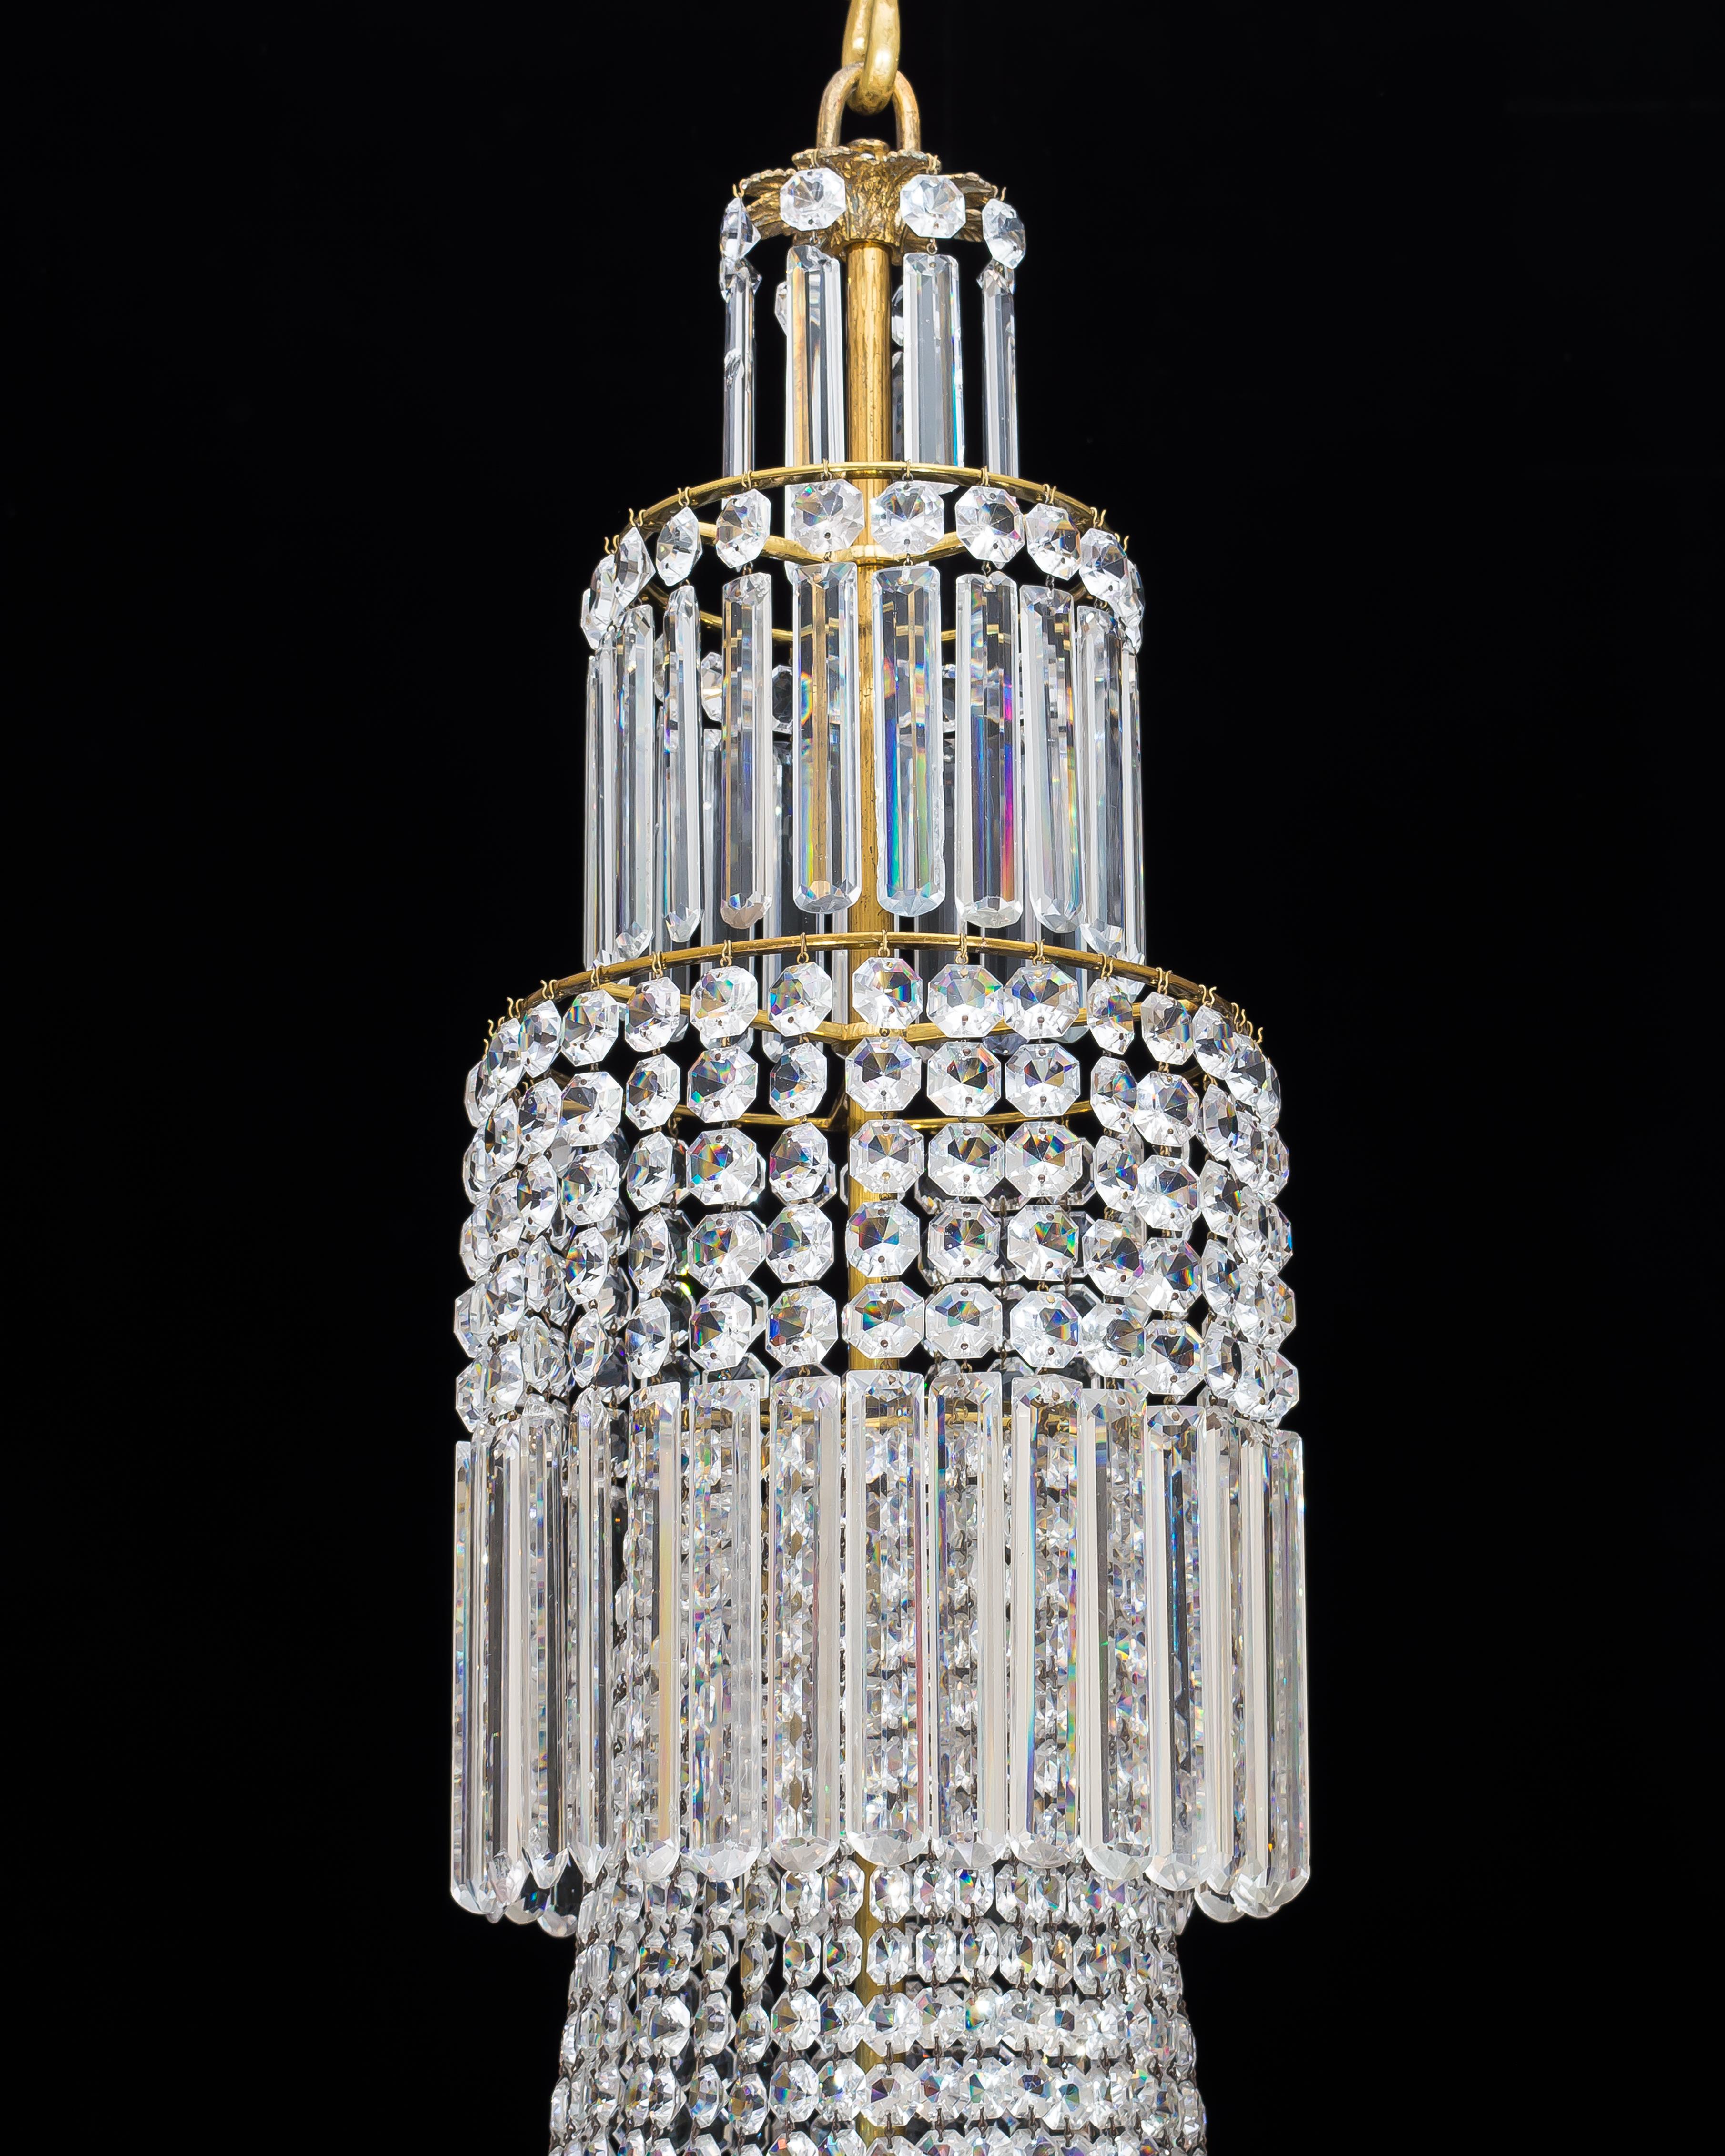 Early 19th Century Regency Crystal Chandelier of Classic Tent and Basket Design by John Blades